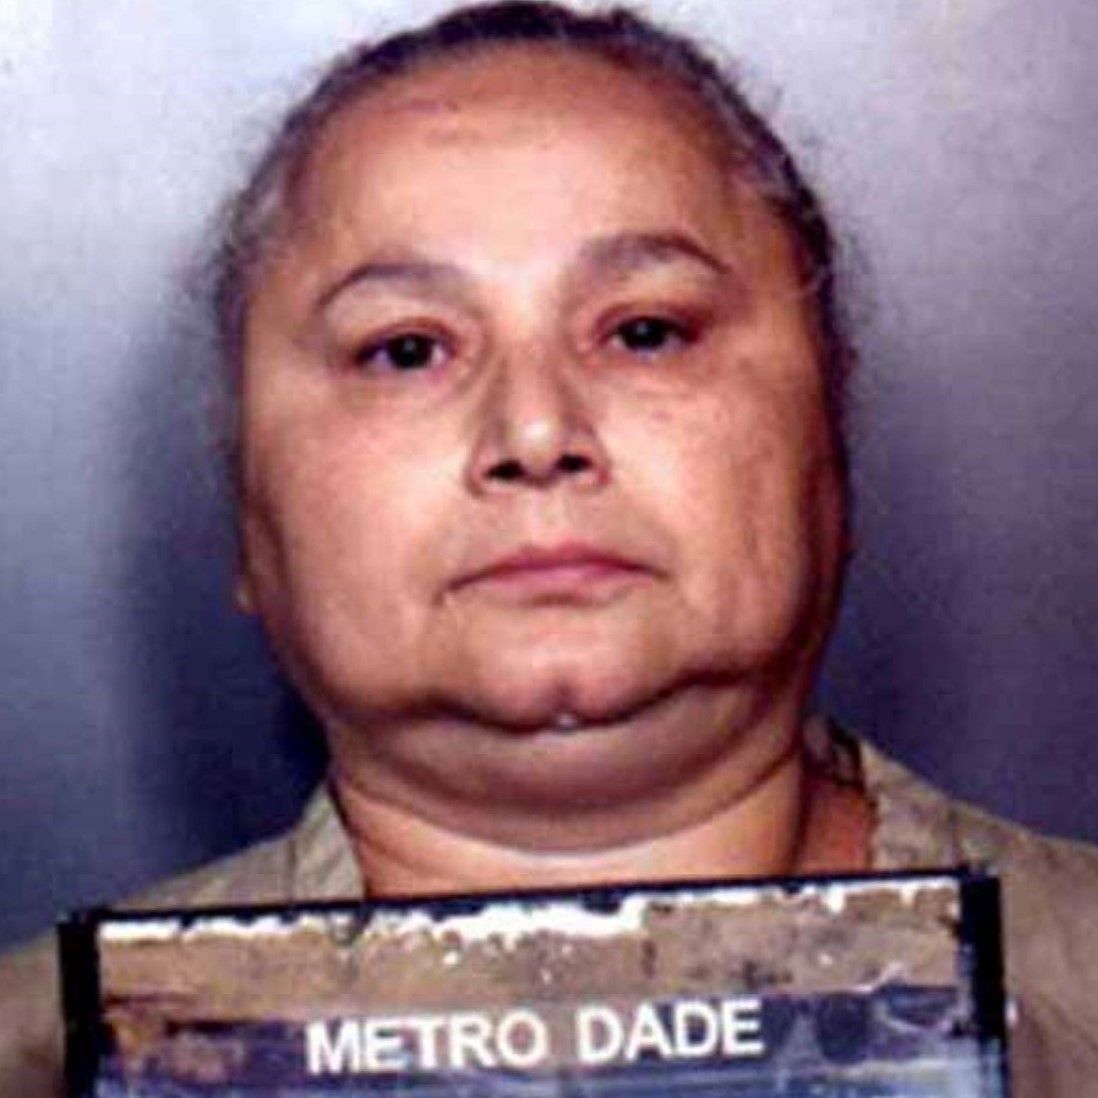 A mugshot of Blanco from 1985 (Image via Metro Dade Police Department)